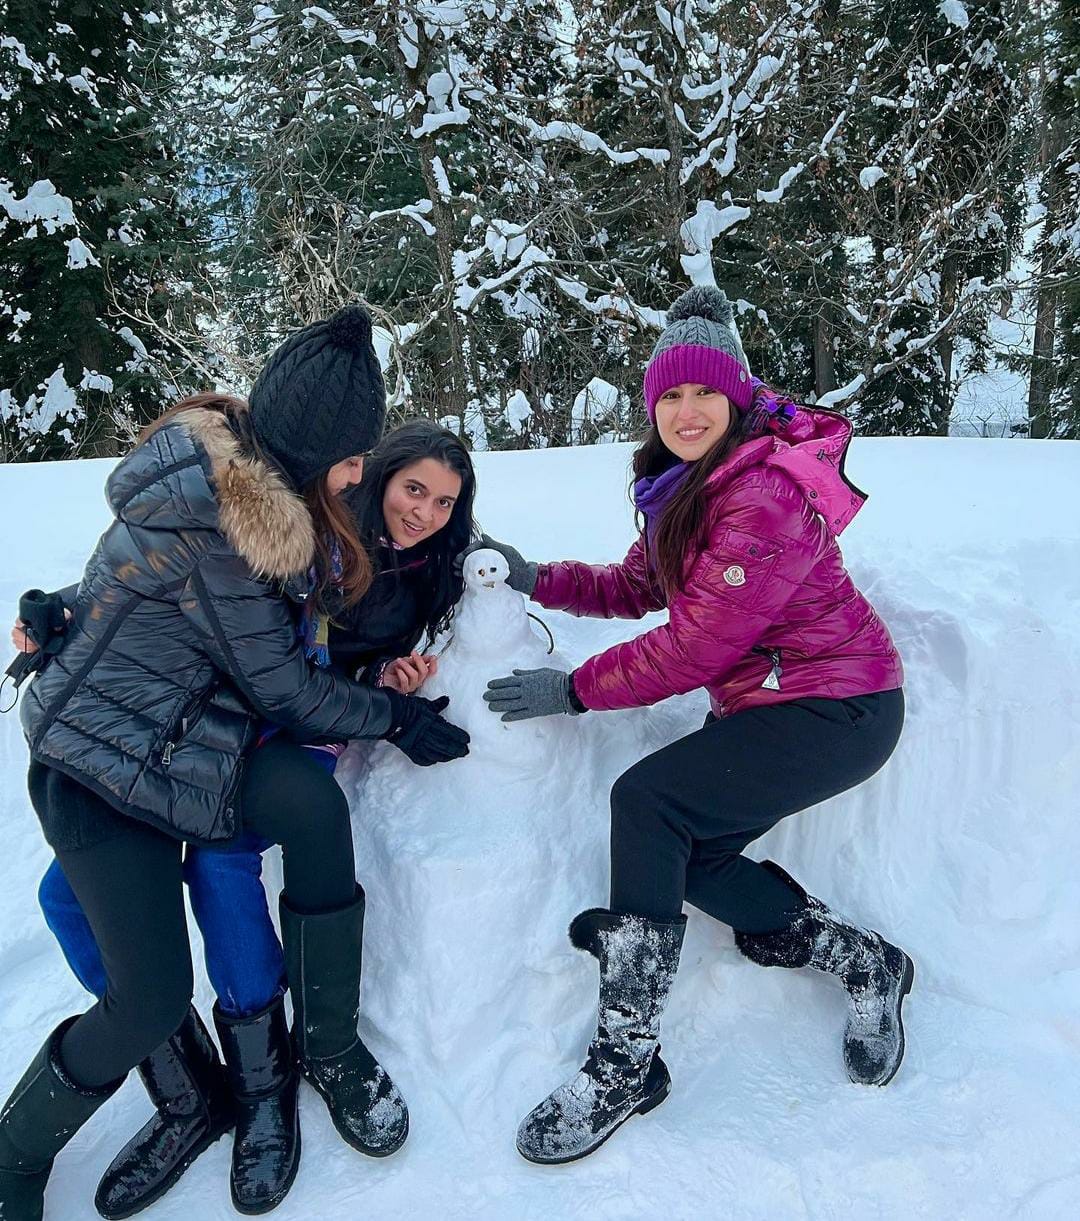 Sara and her friends building a snowman,